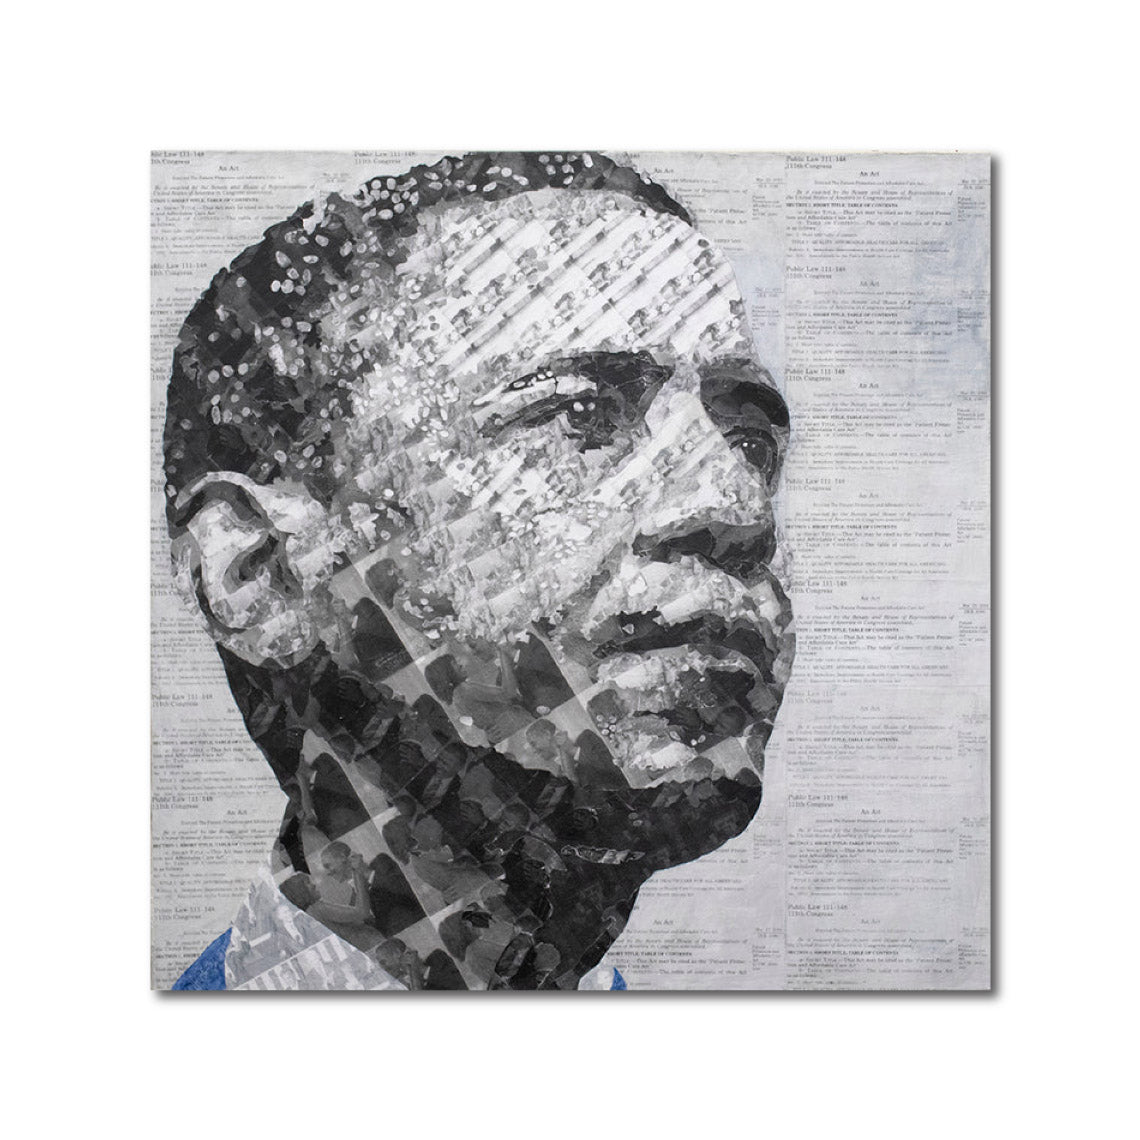 'PRESIDENT OBAMA' - Acrylic and pencil on canvas